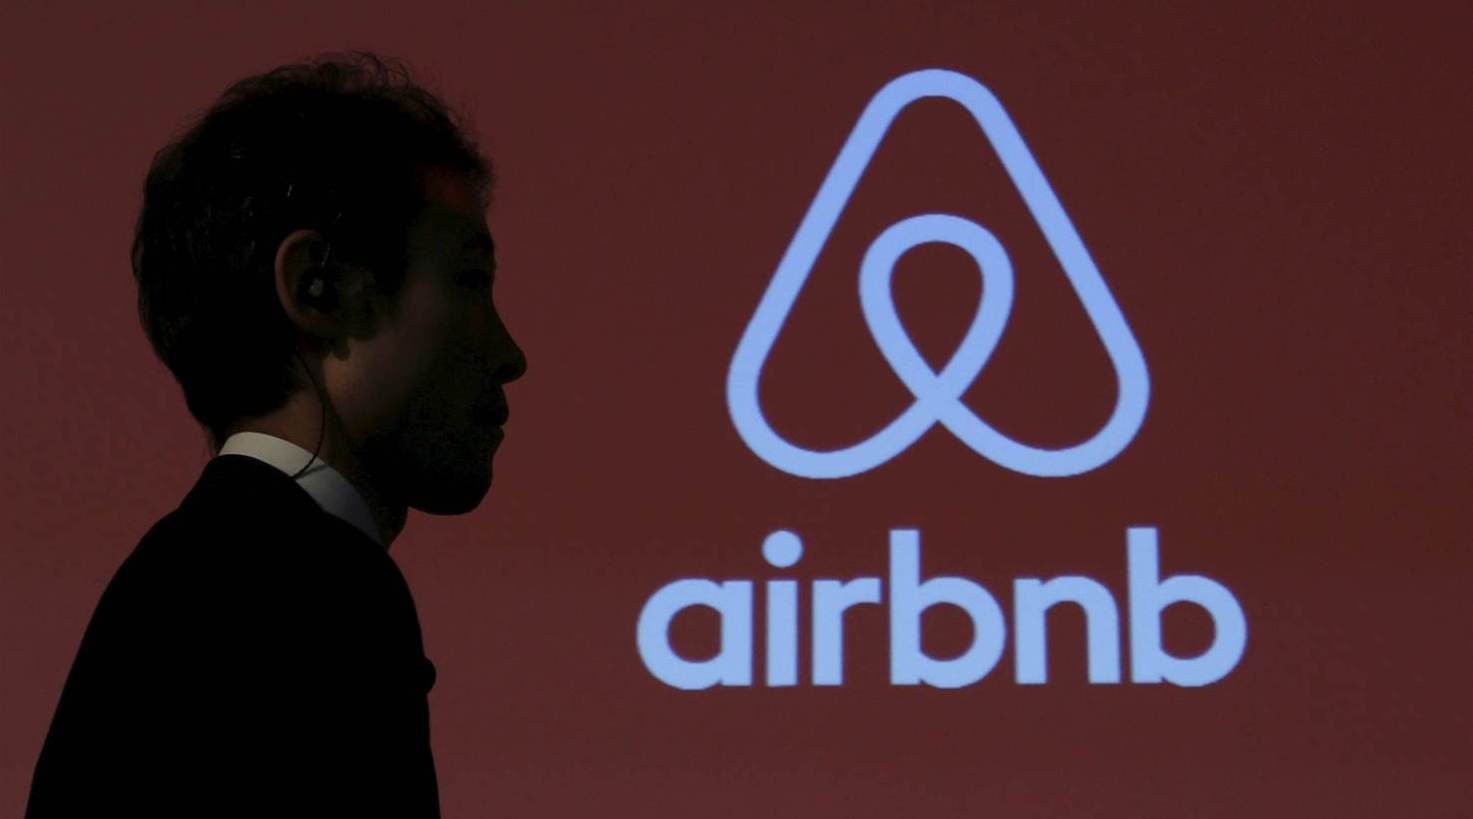 Vacation rental firm Airbnb to close its domestic business in China